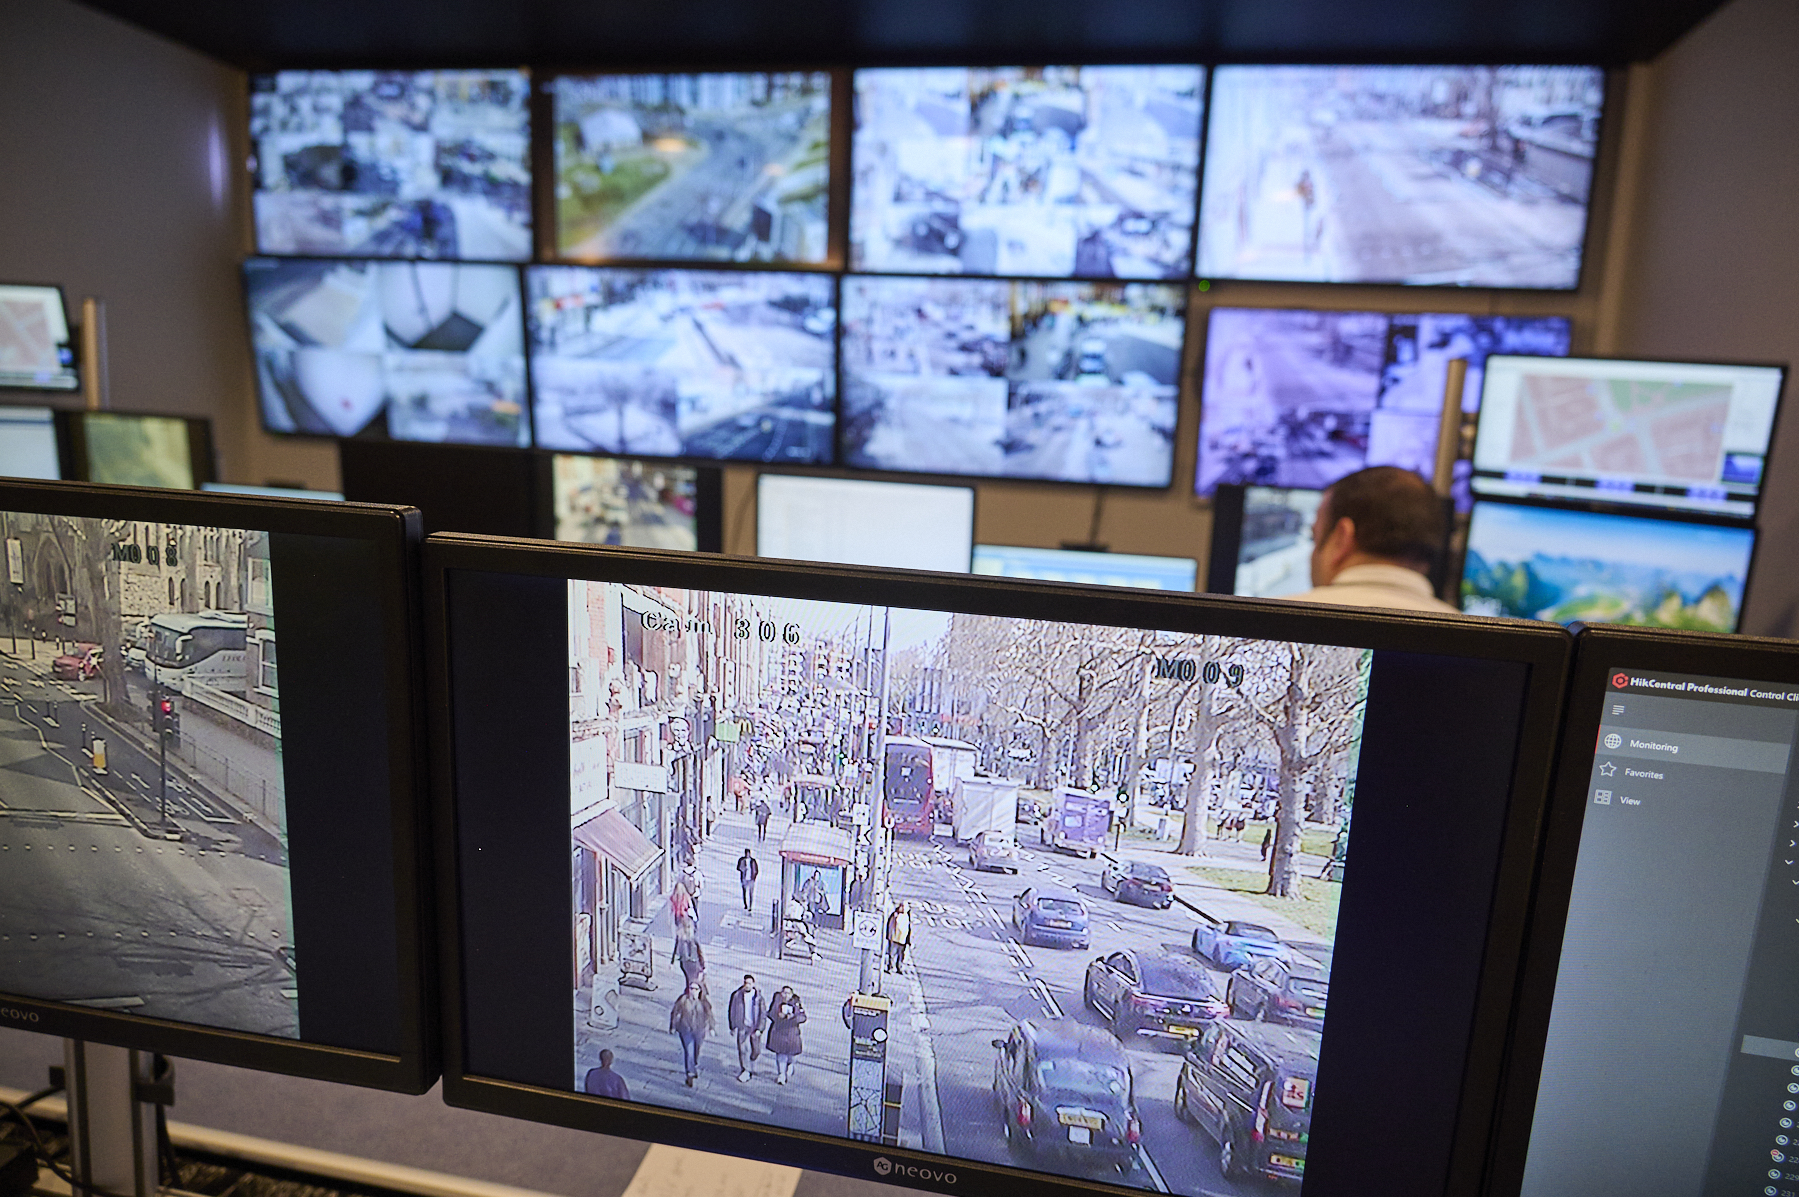 CCTV control room with lots of screens showing live CCTV footage from a street in Hammersmith & Fulham